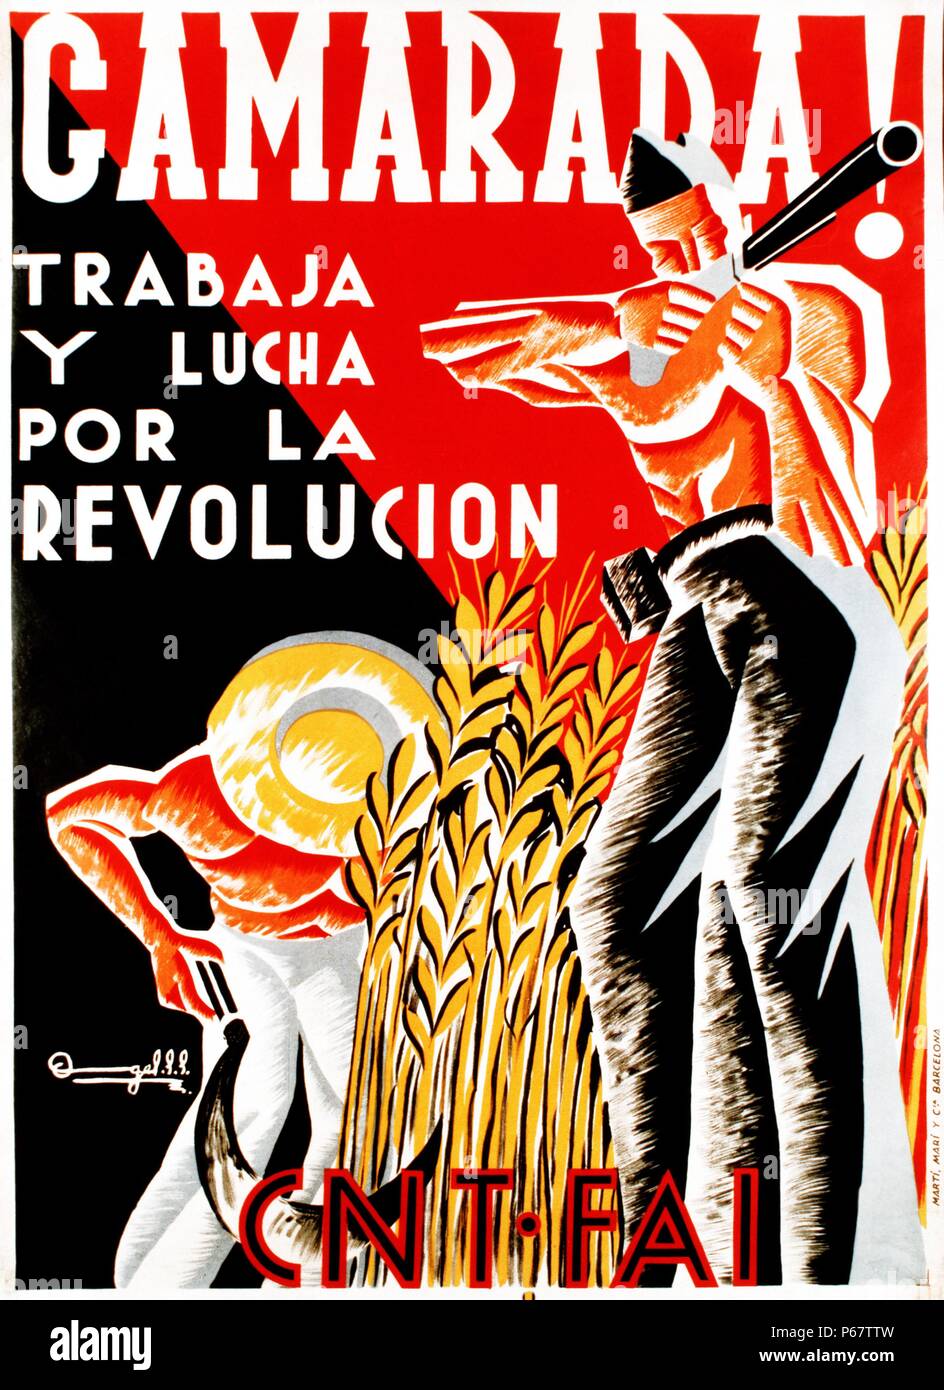 Propaganda poster from Spanish Civil War. Text reads 'Camarada trabaja y lucha por la revolucion.' The Spanish Civil War was fought from 17 July 1936 to 1 April 1939 between the Republicans, who were loyal to the democratically elected Spanish Republic, and the Nationalists, a rebel group led by General Francisco Franco. Stock Photo